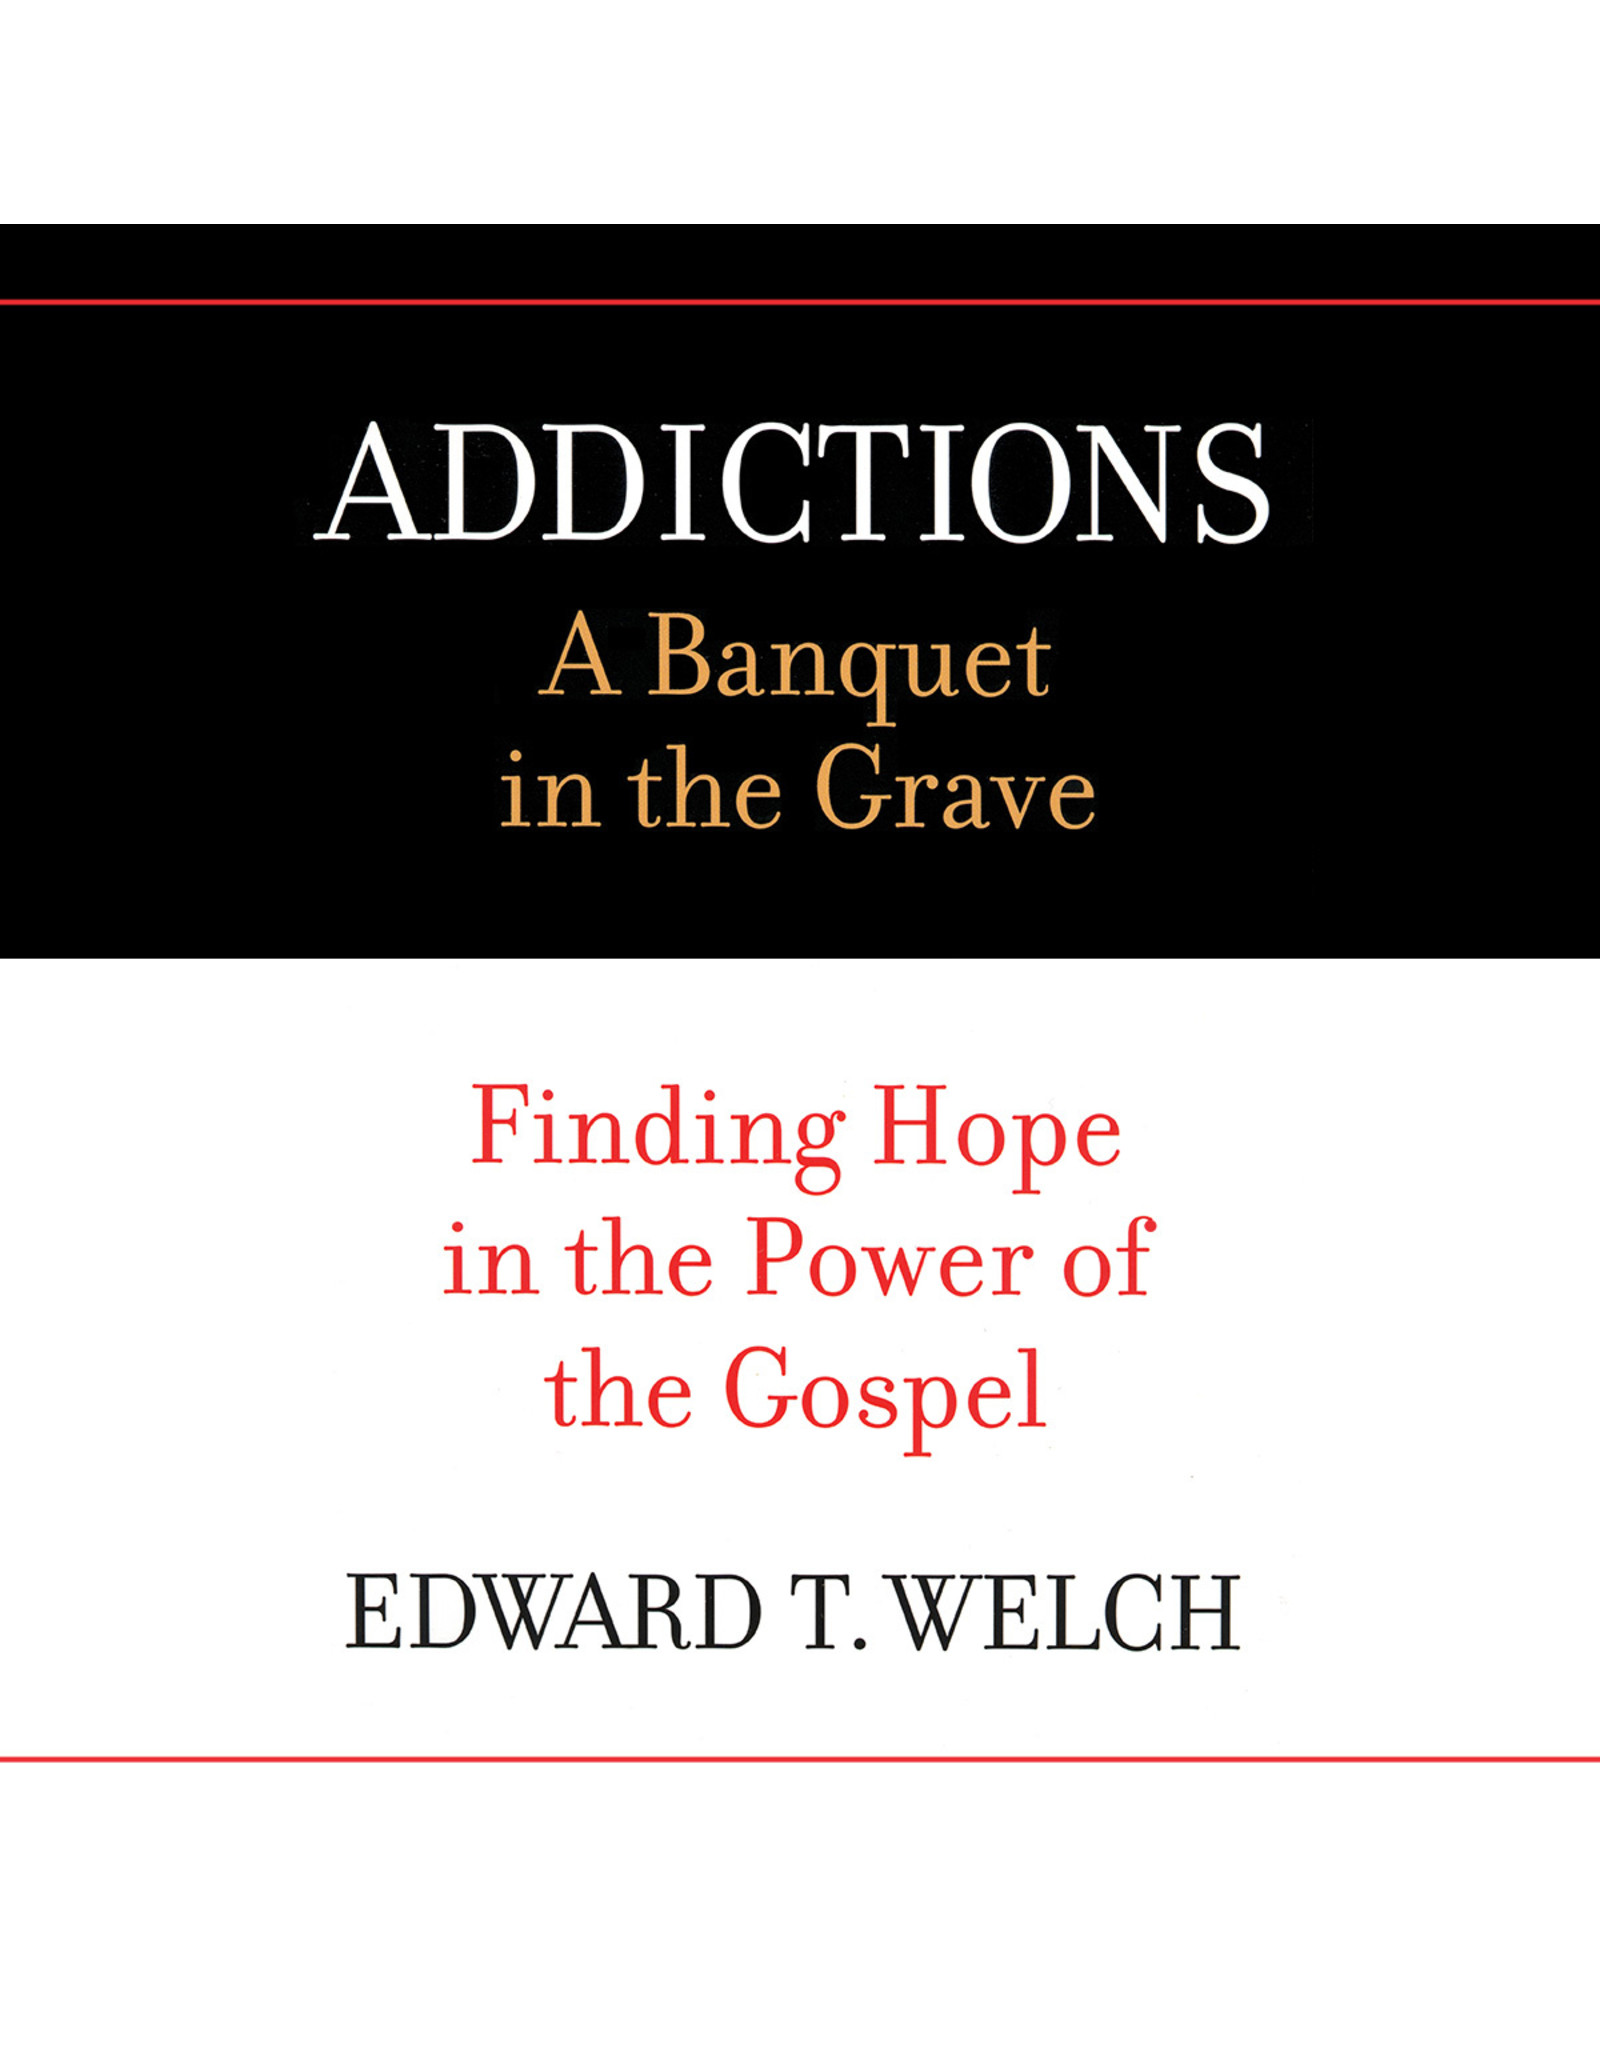 Edward T Welch Addictions: A Banquet in the Grave  - Audio Book